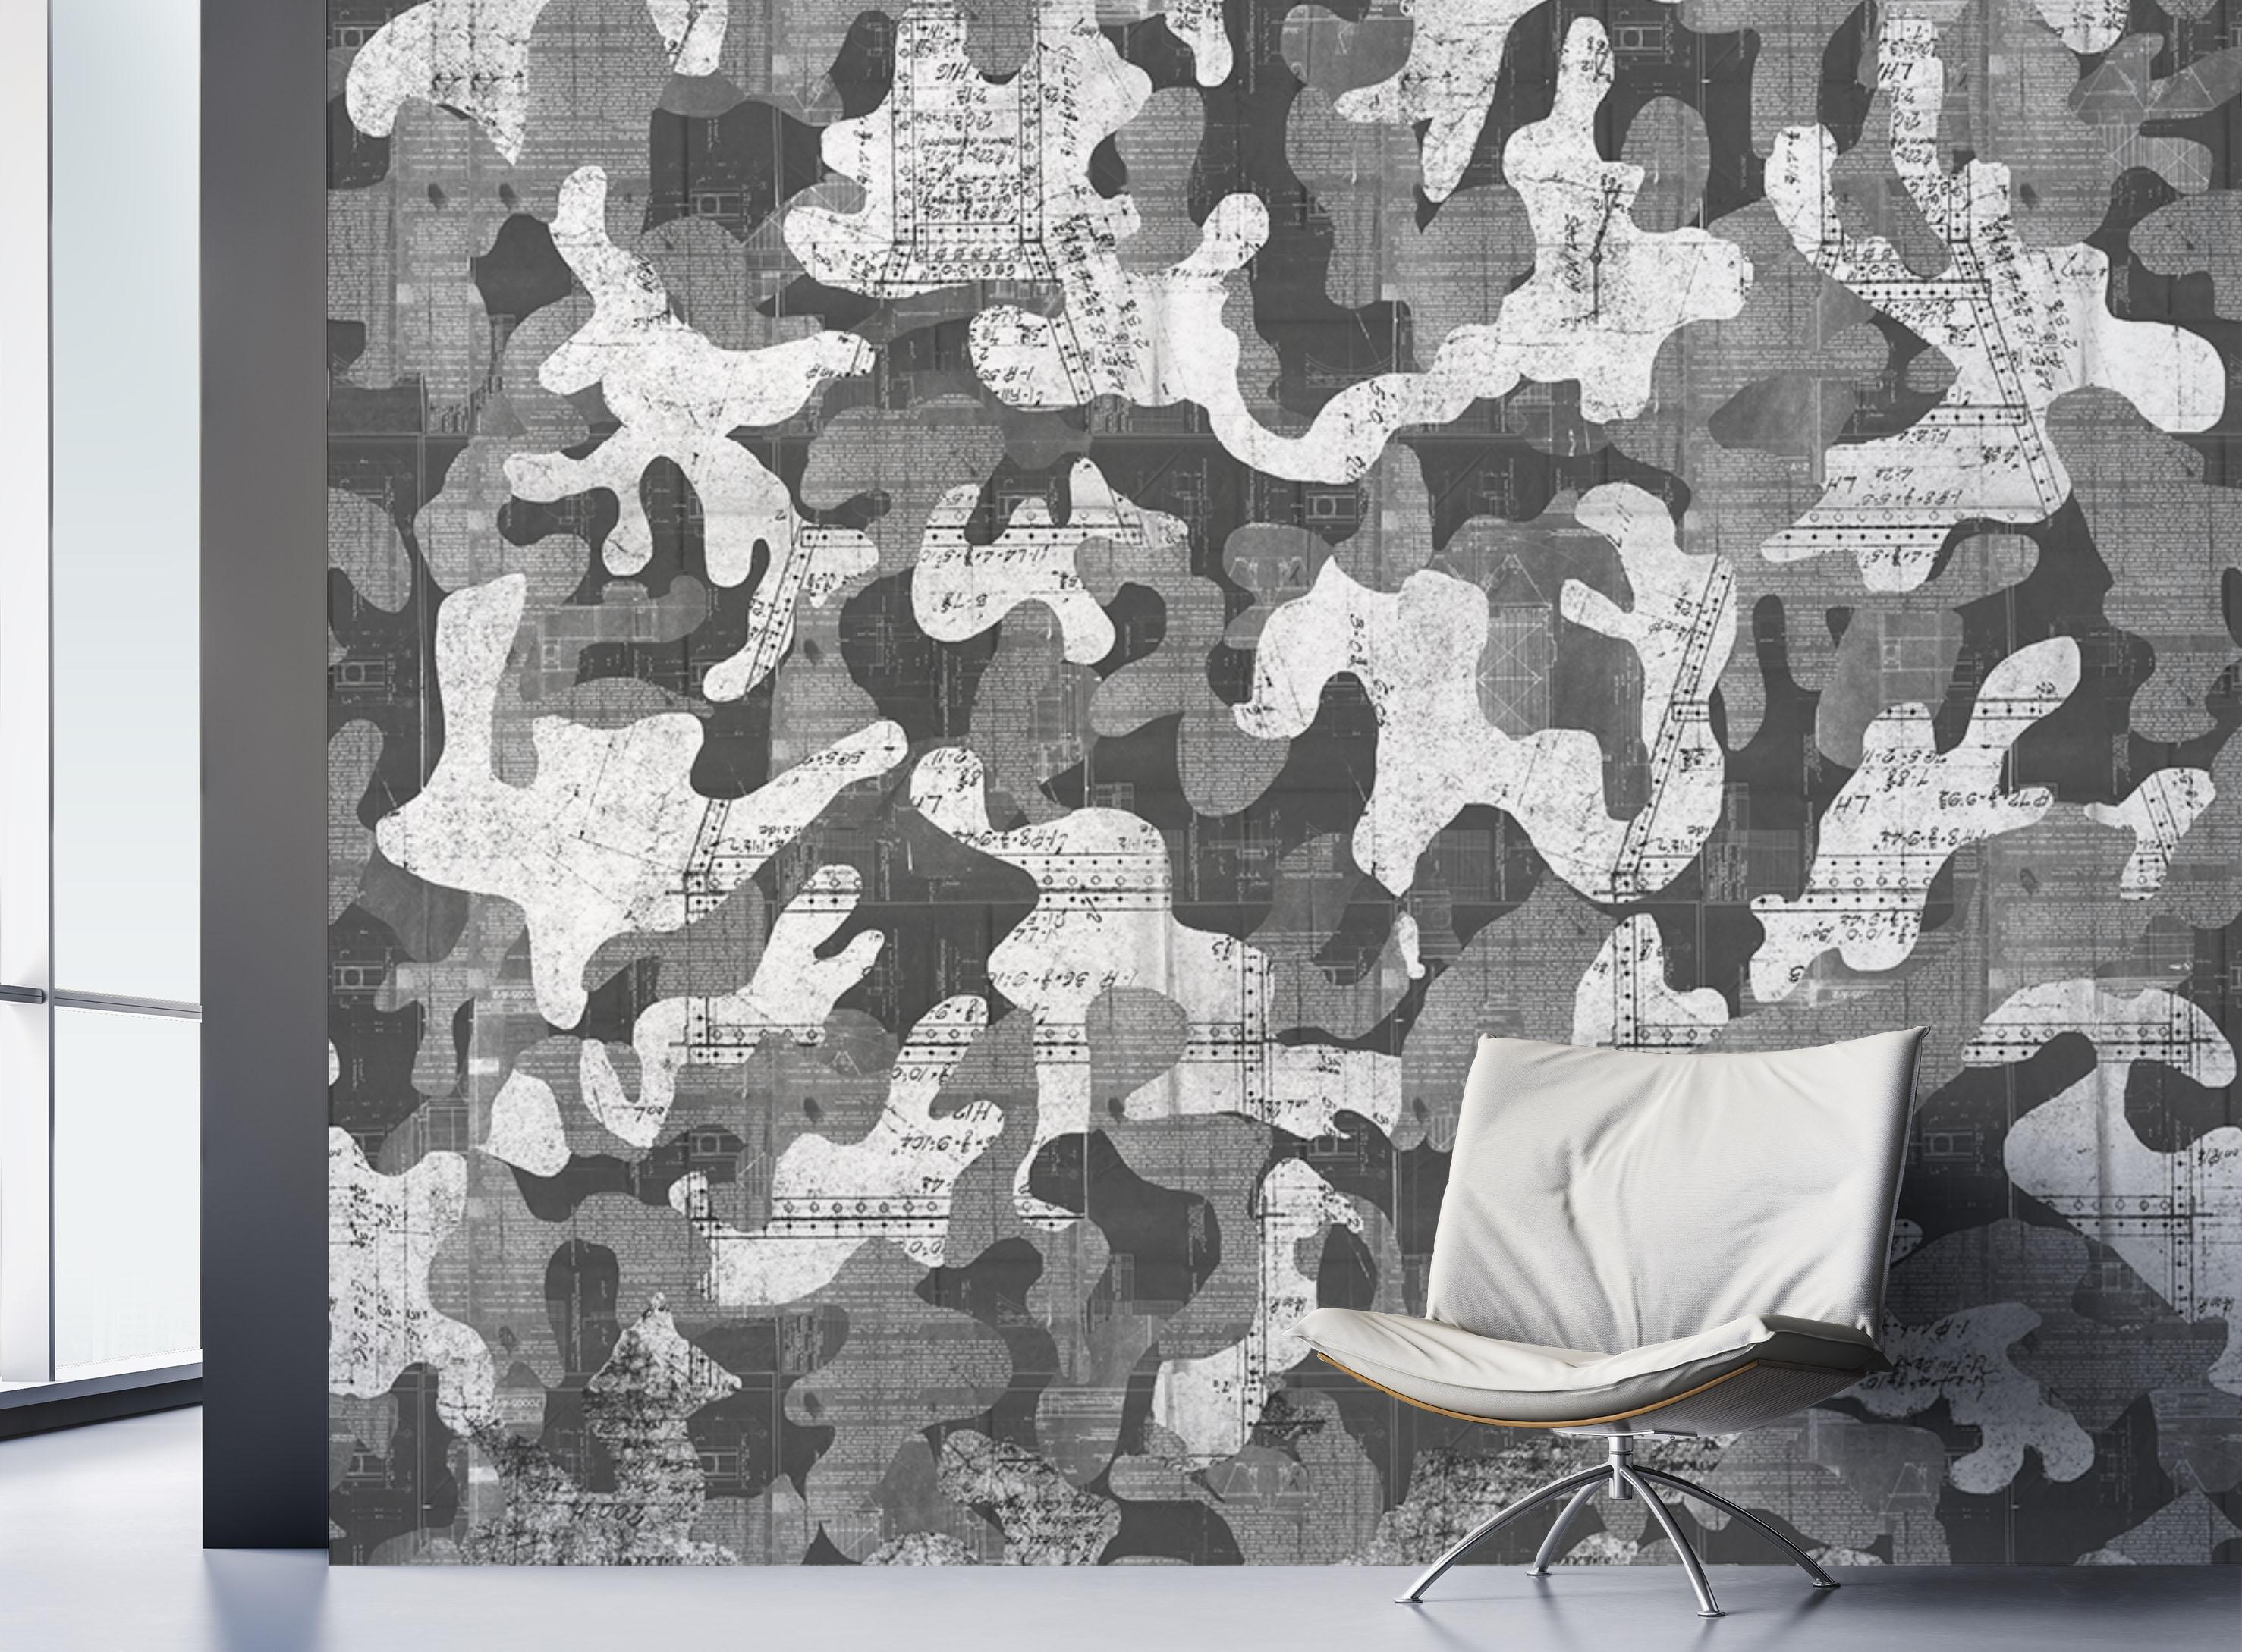 Escape was created using found vintage blue prints from the early to mid 1900’s and placed into a fluid, hand drawn camouflage pattern. Intrigued by the idea that blue prints and camo have a utilitarian purpose, we combined them creating an opposite